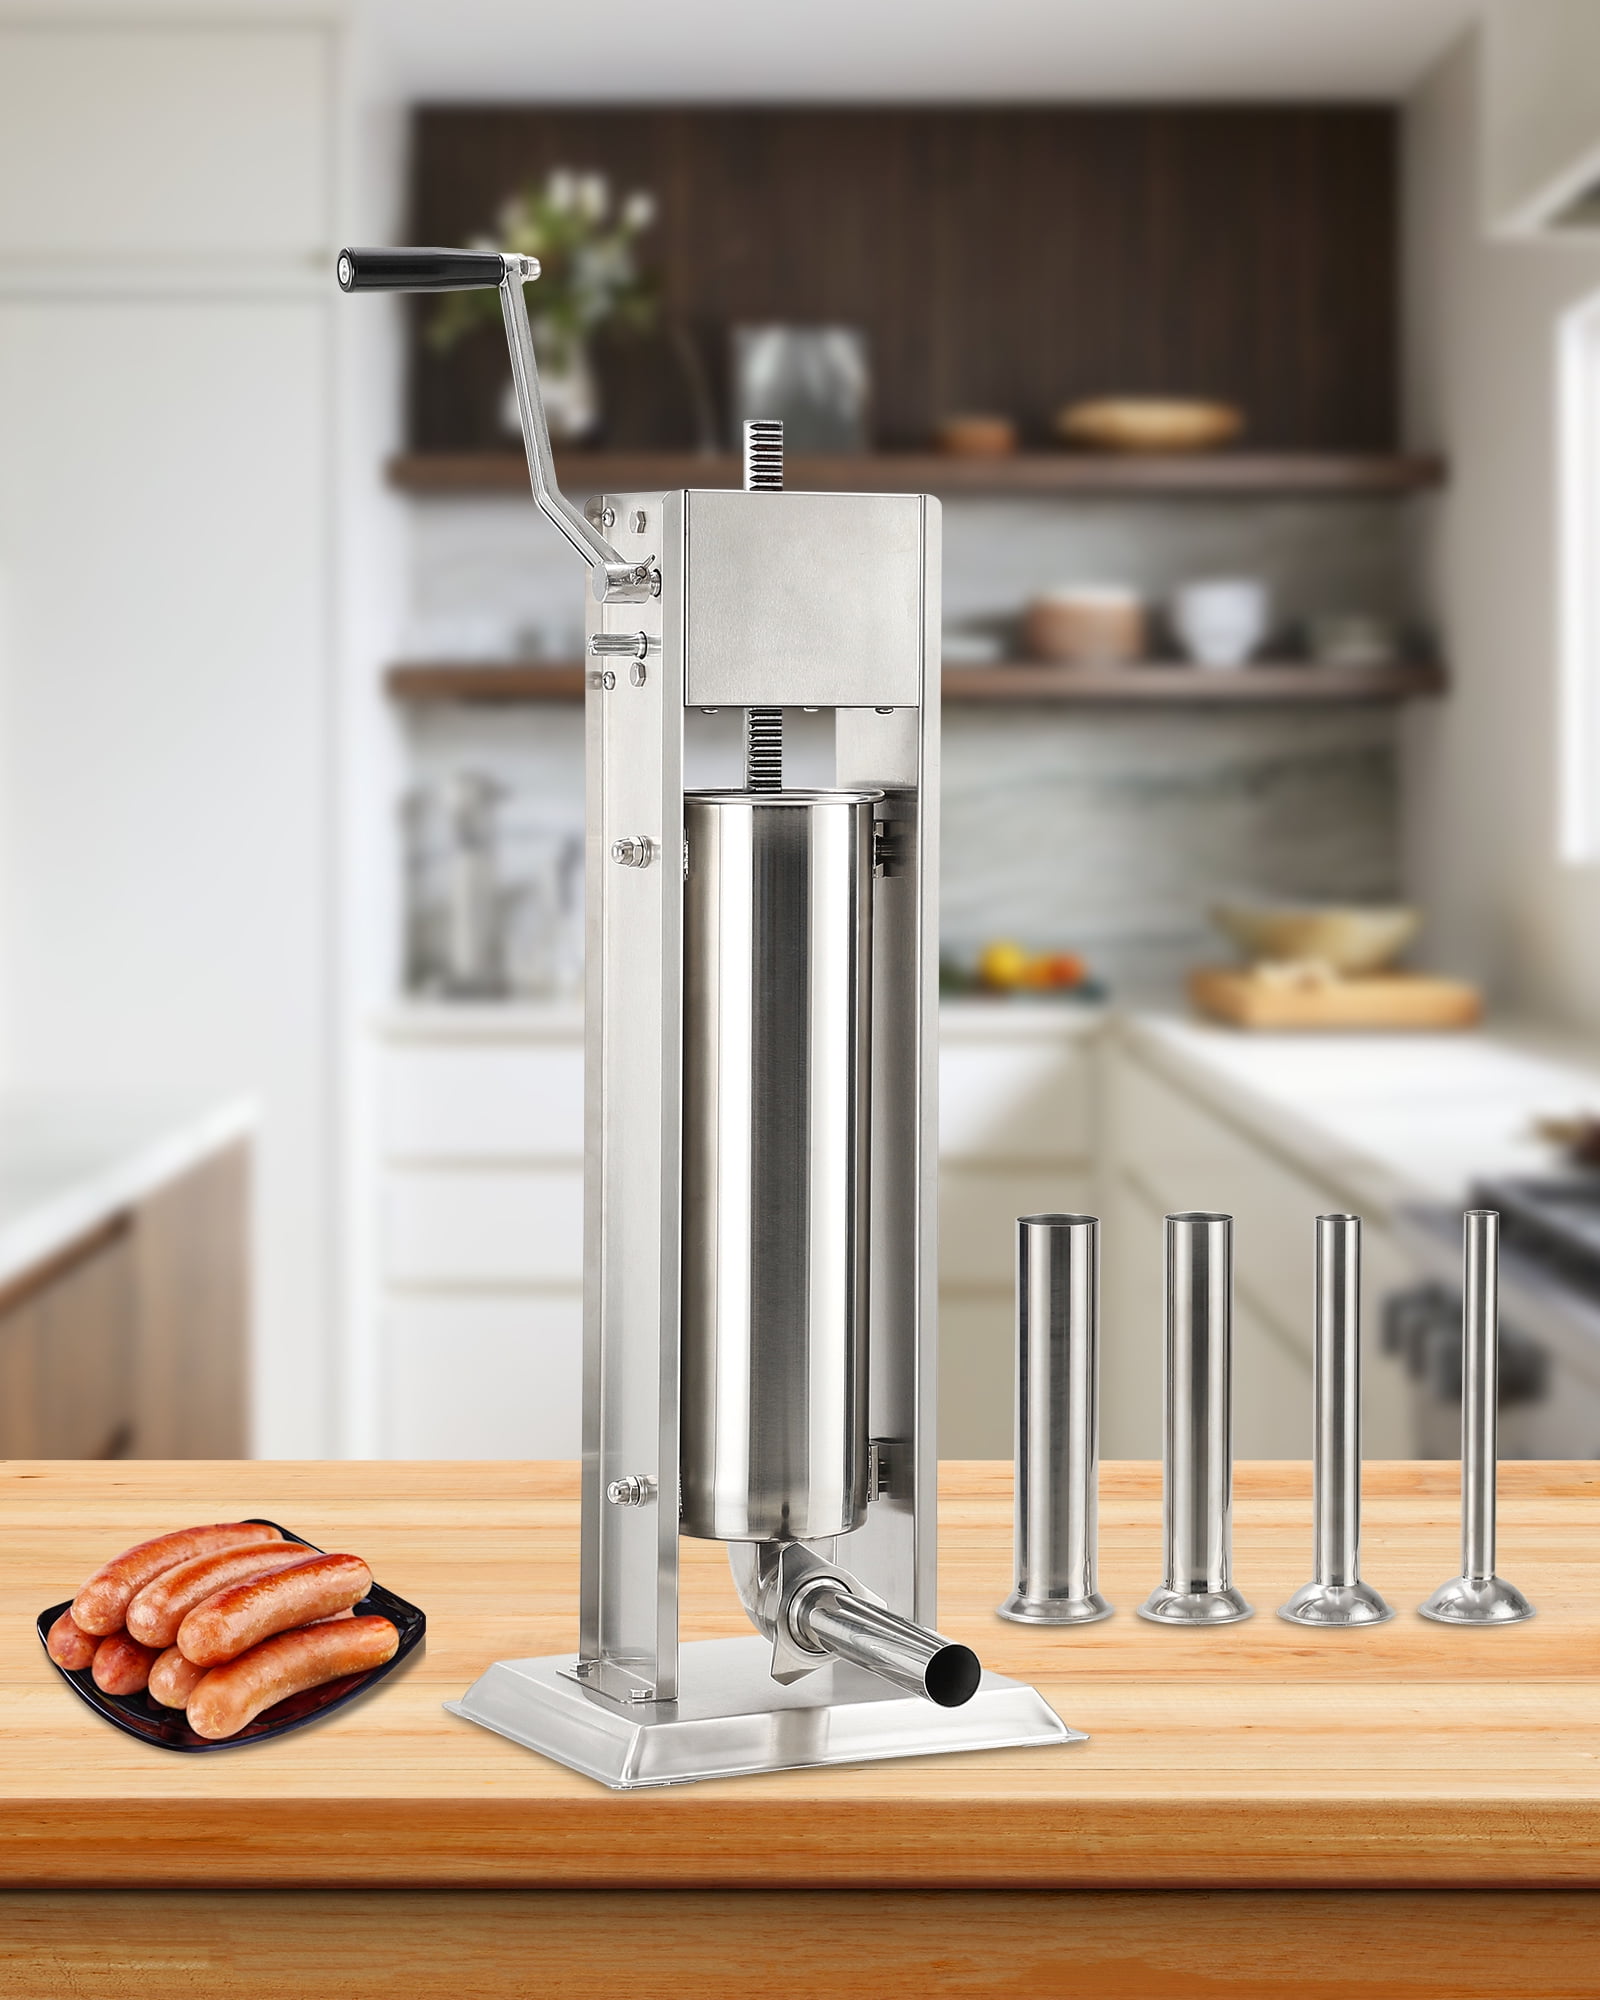 ROVSUN 24.3lbs/15l Electric Sausage Stuffer, Adjustable Speed Stainless Steel Sausage Maker Meat Stuffer, Heavy Duty Vertical Electric Stuffer Sausage